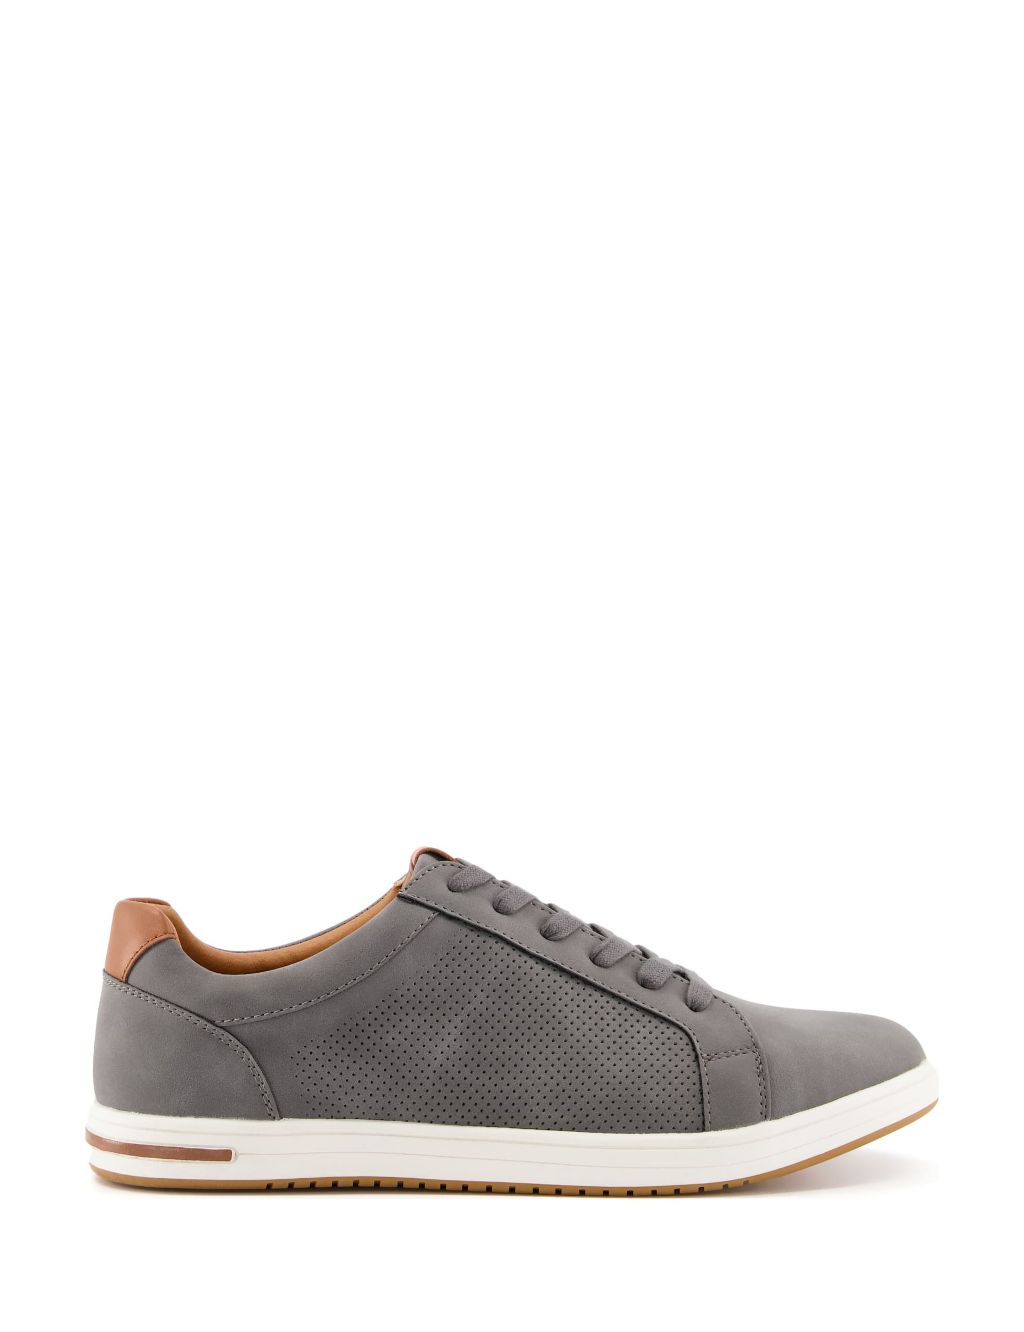 Suedette Lace Up Trainers image 2